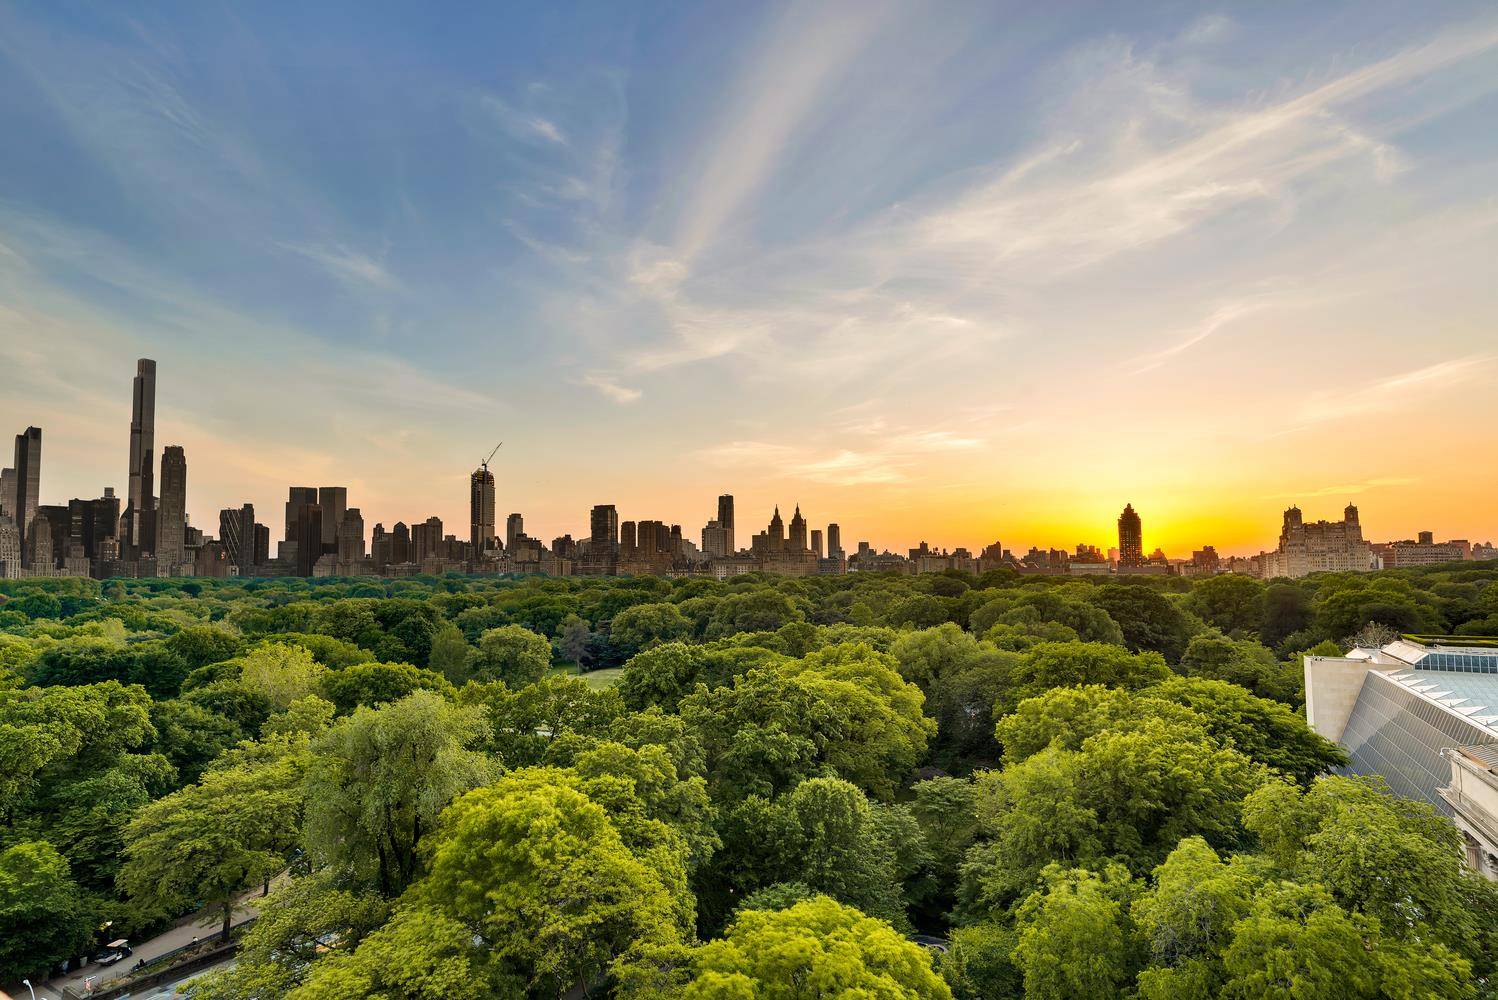 For those desiring iconic Central Park and Manhattan skyline views with beautiful natural light, this home is unequalled.